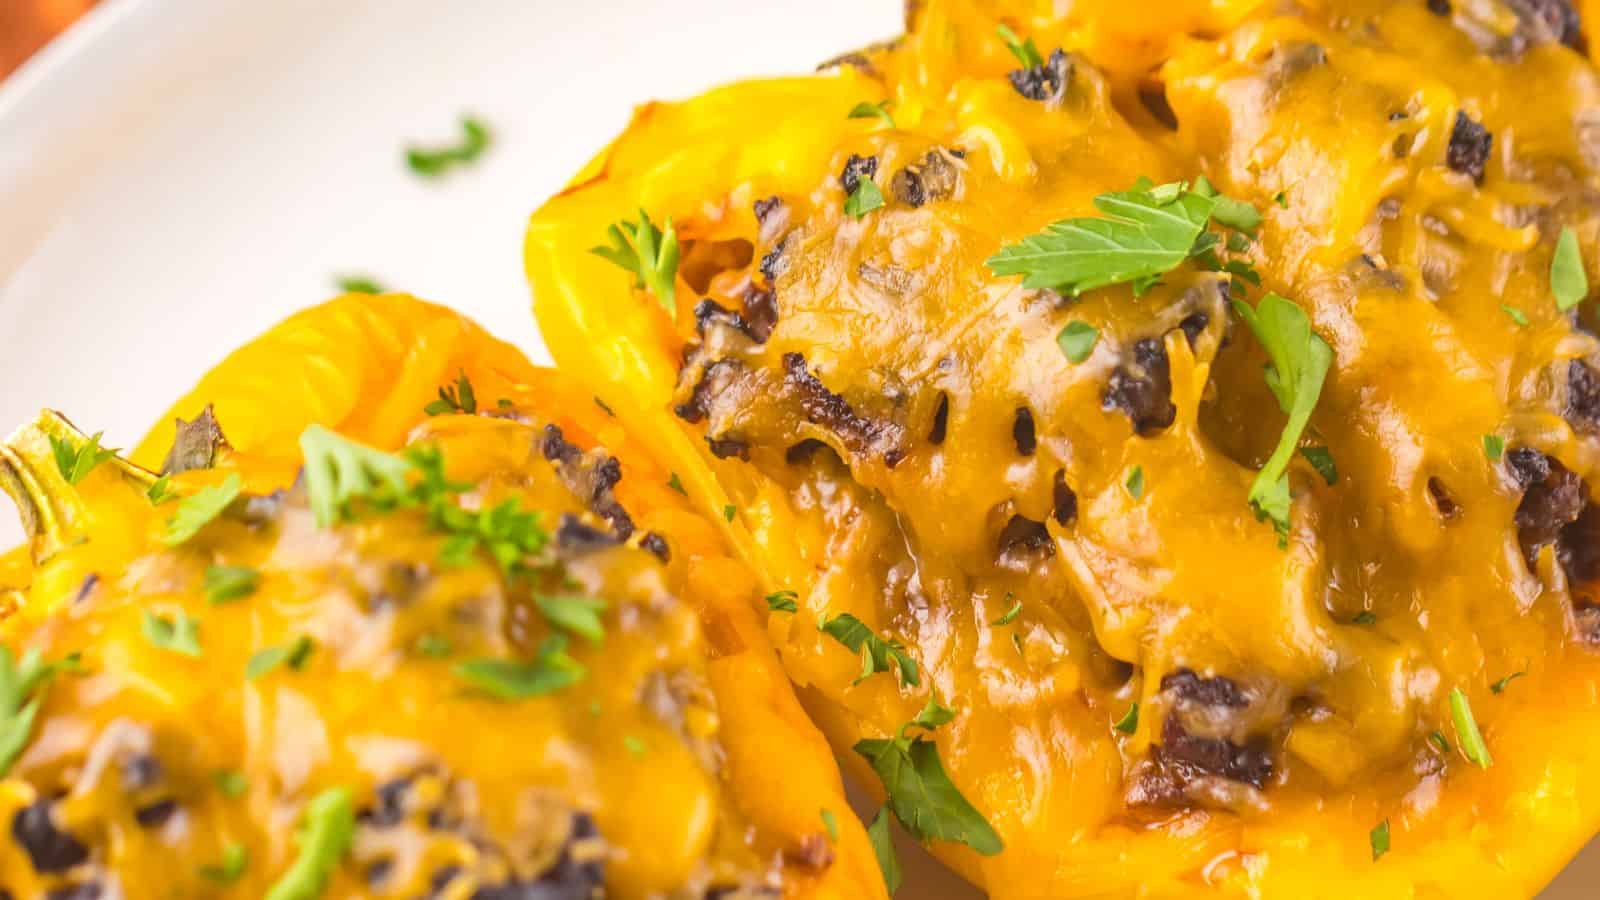 Close-up of two yellow bell peppers stuffed with a mixture of sloppy joe, black beans, and rice, topped with melted cheddar cheese and garnished with chopped parsley.